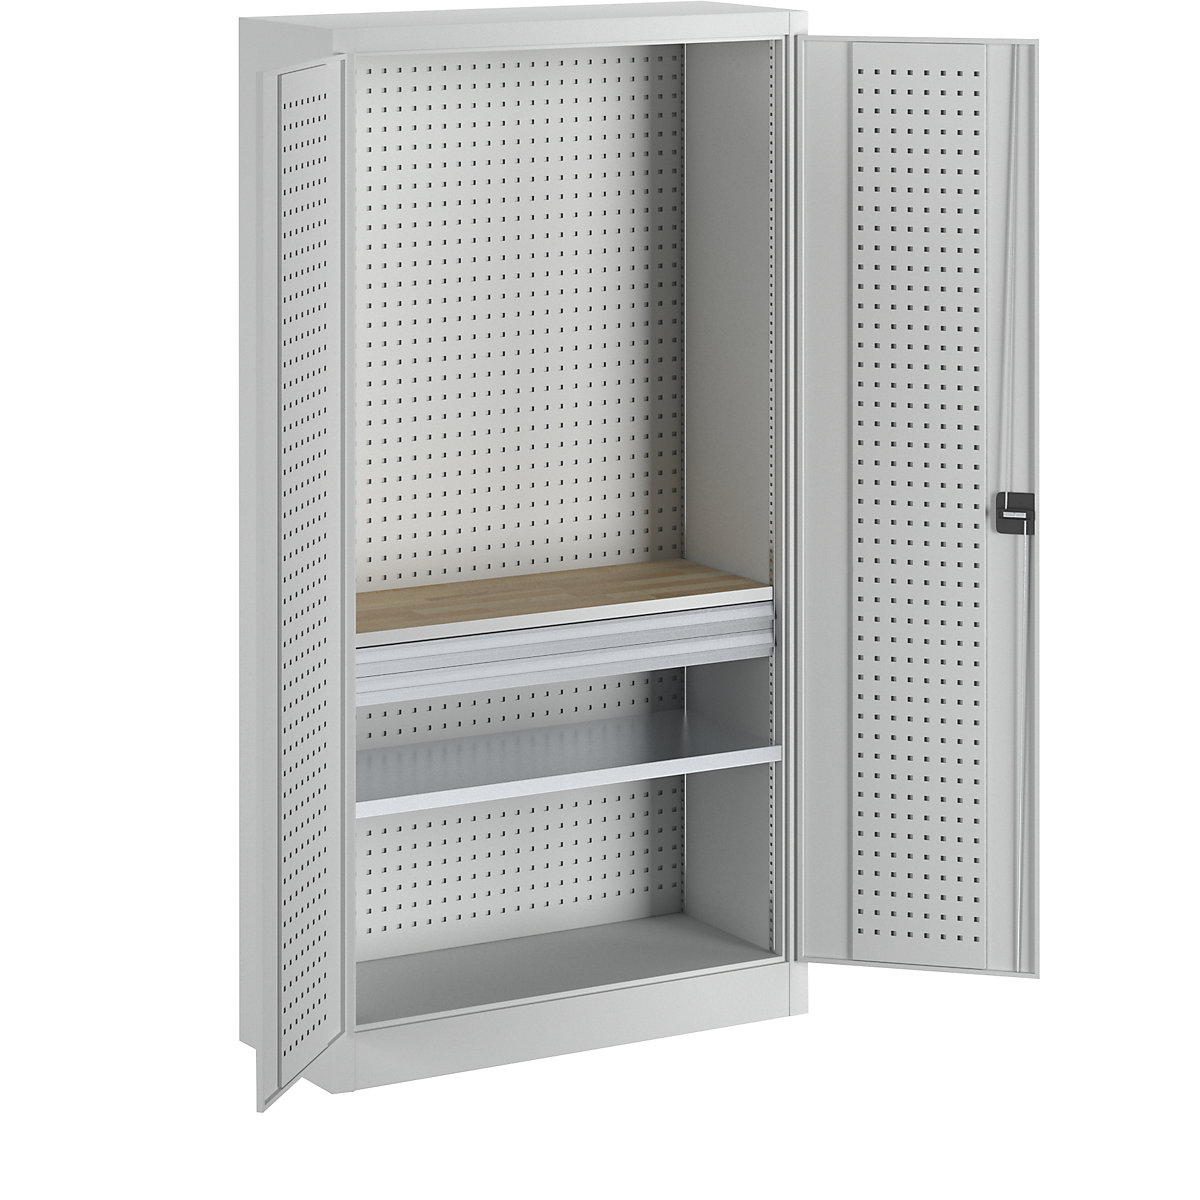 Tool cupboard with perforations